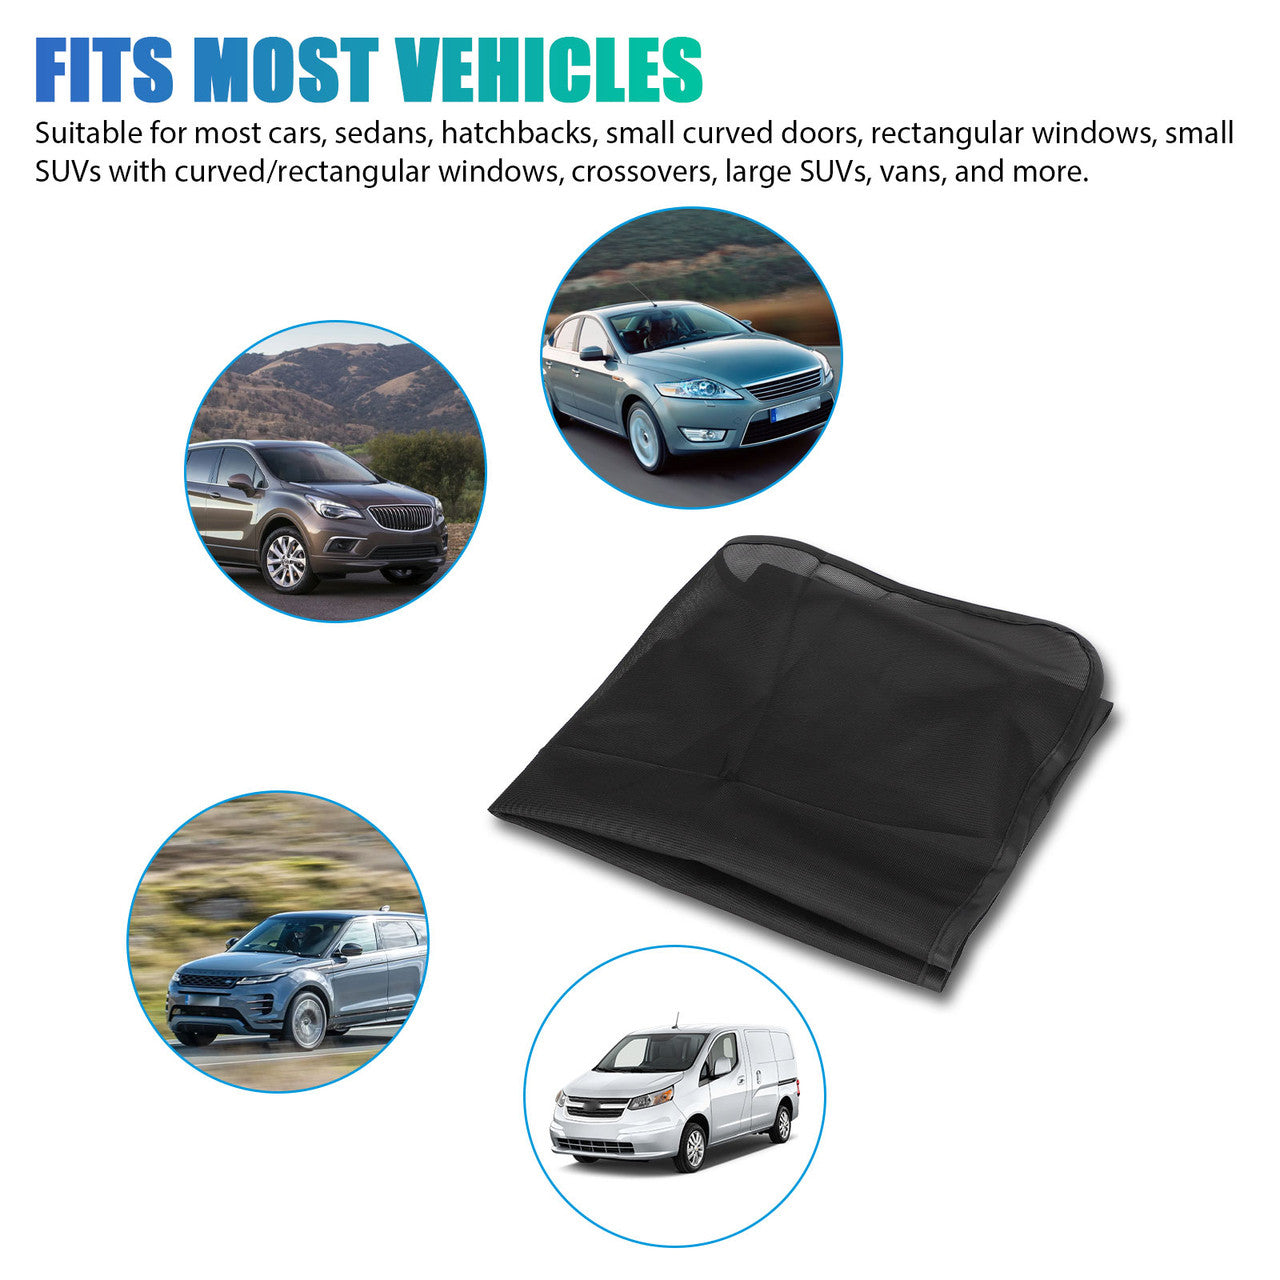 4Pcs Car Side Window Sunshade, Magnetic Car Side Window Sunshade for Baby Kid Sun Protection, Breathable Sun Shade Mesh Backseat Fits for Most Cars SUVs, Anti-mosquito, Privacy Protection, 80x50cm